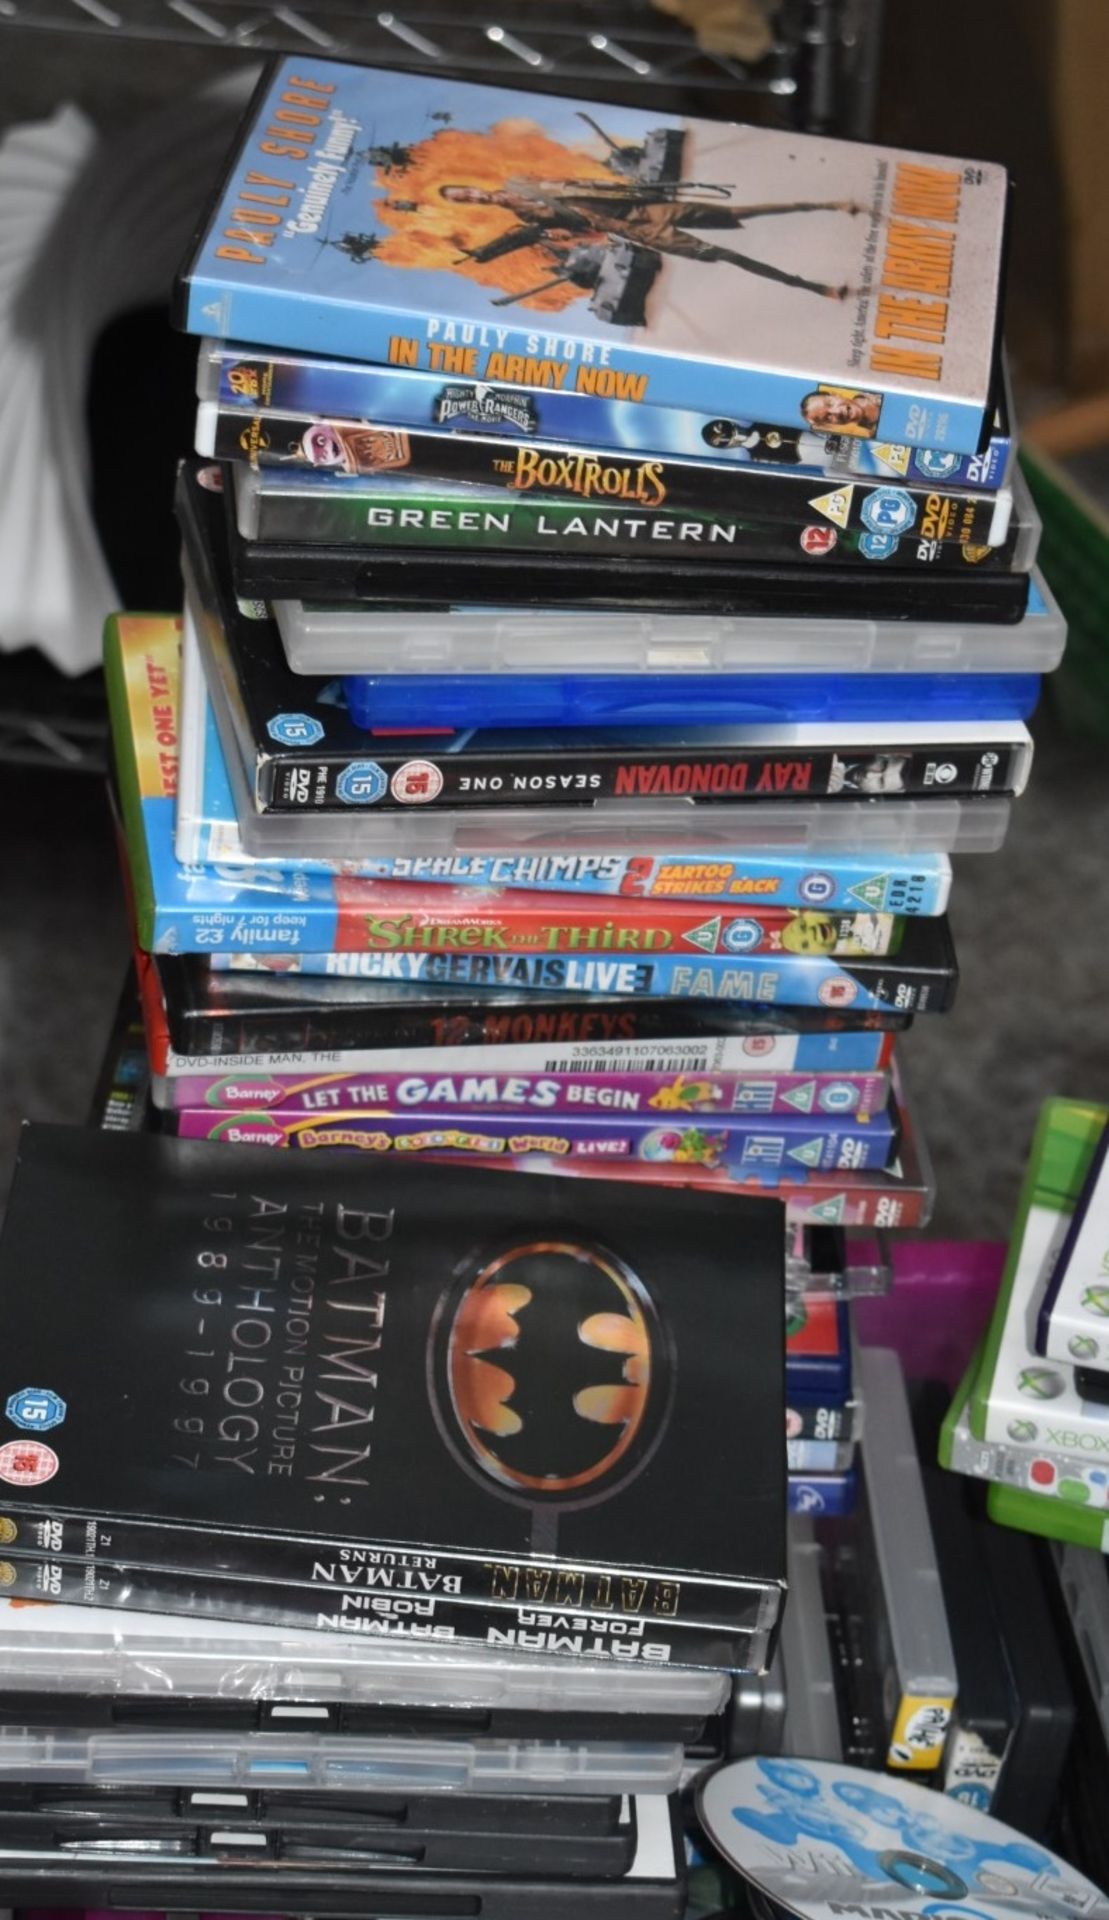 1 x Large Collection of DVD Films and Games - Plus Box Sets and Portable DVD Player - Ref: In2108 - Image 5 of 10